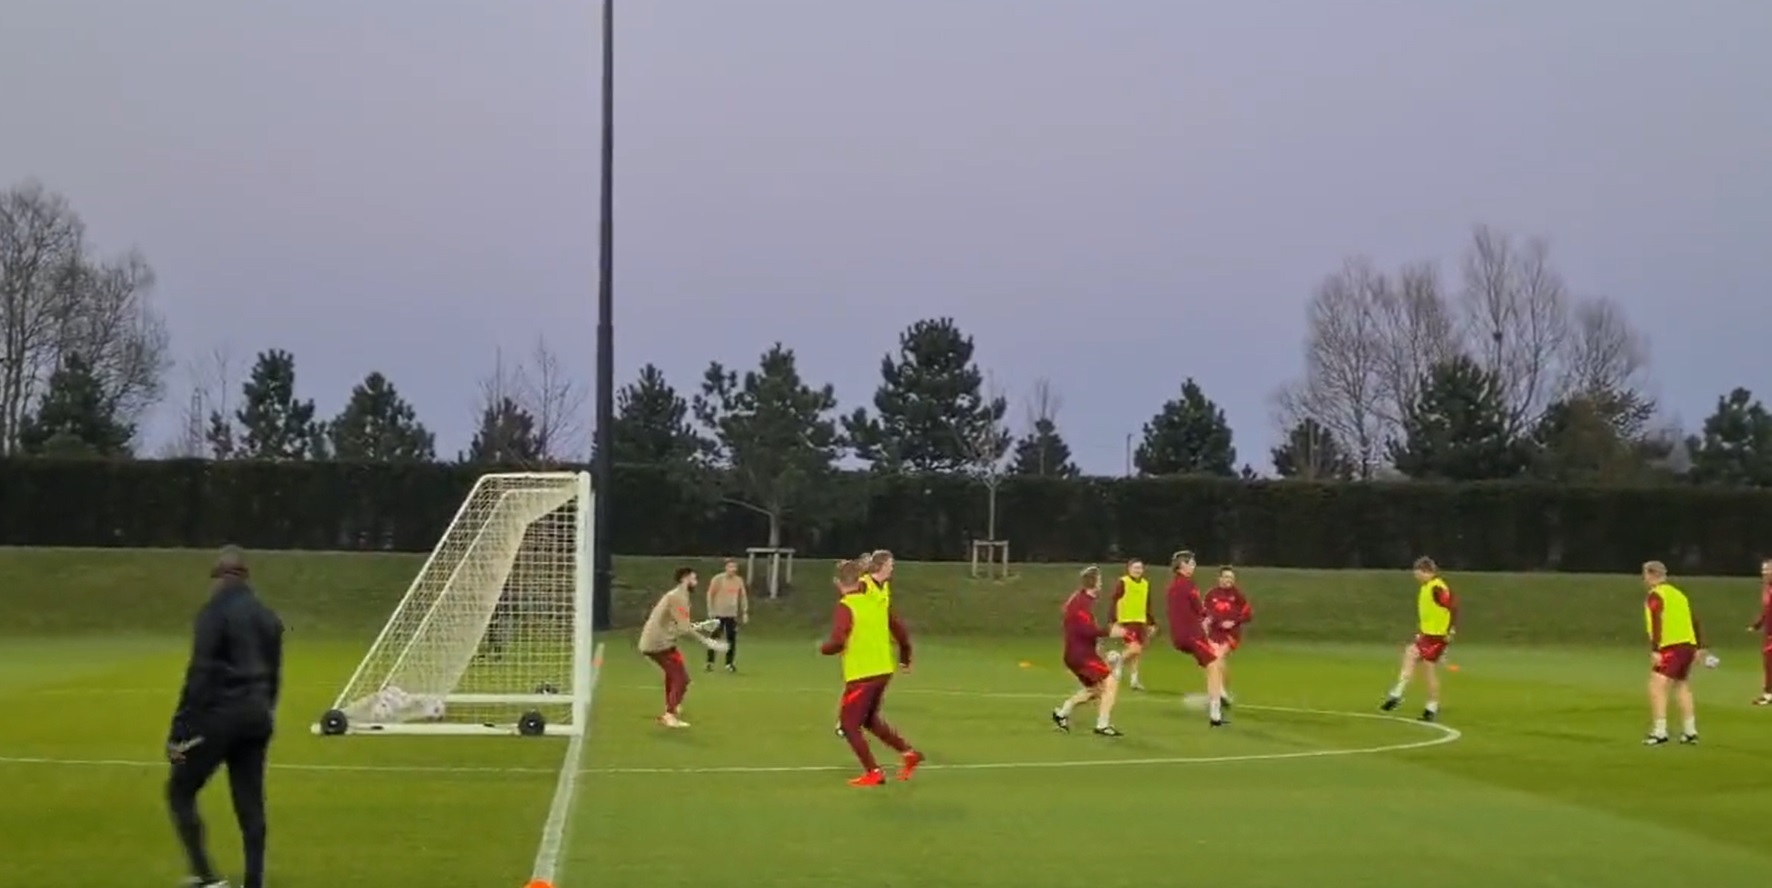 (Video) Gerrard shows he’s still got it with superb first-time finish from range